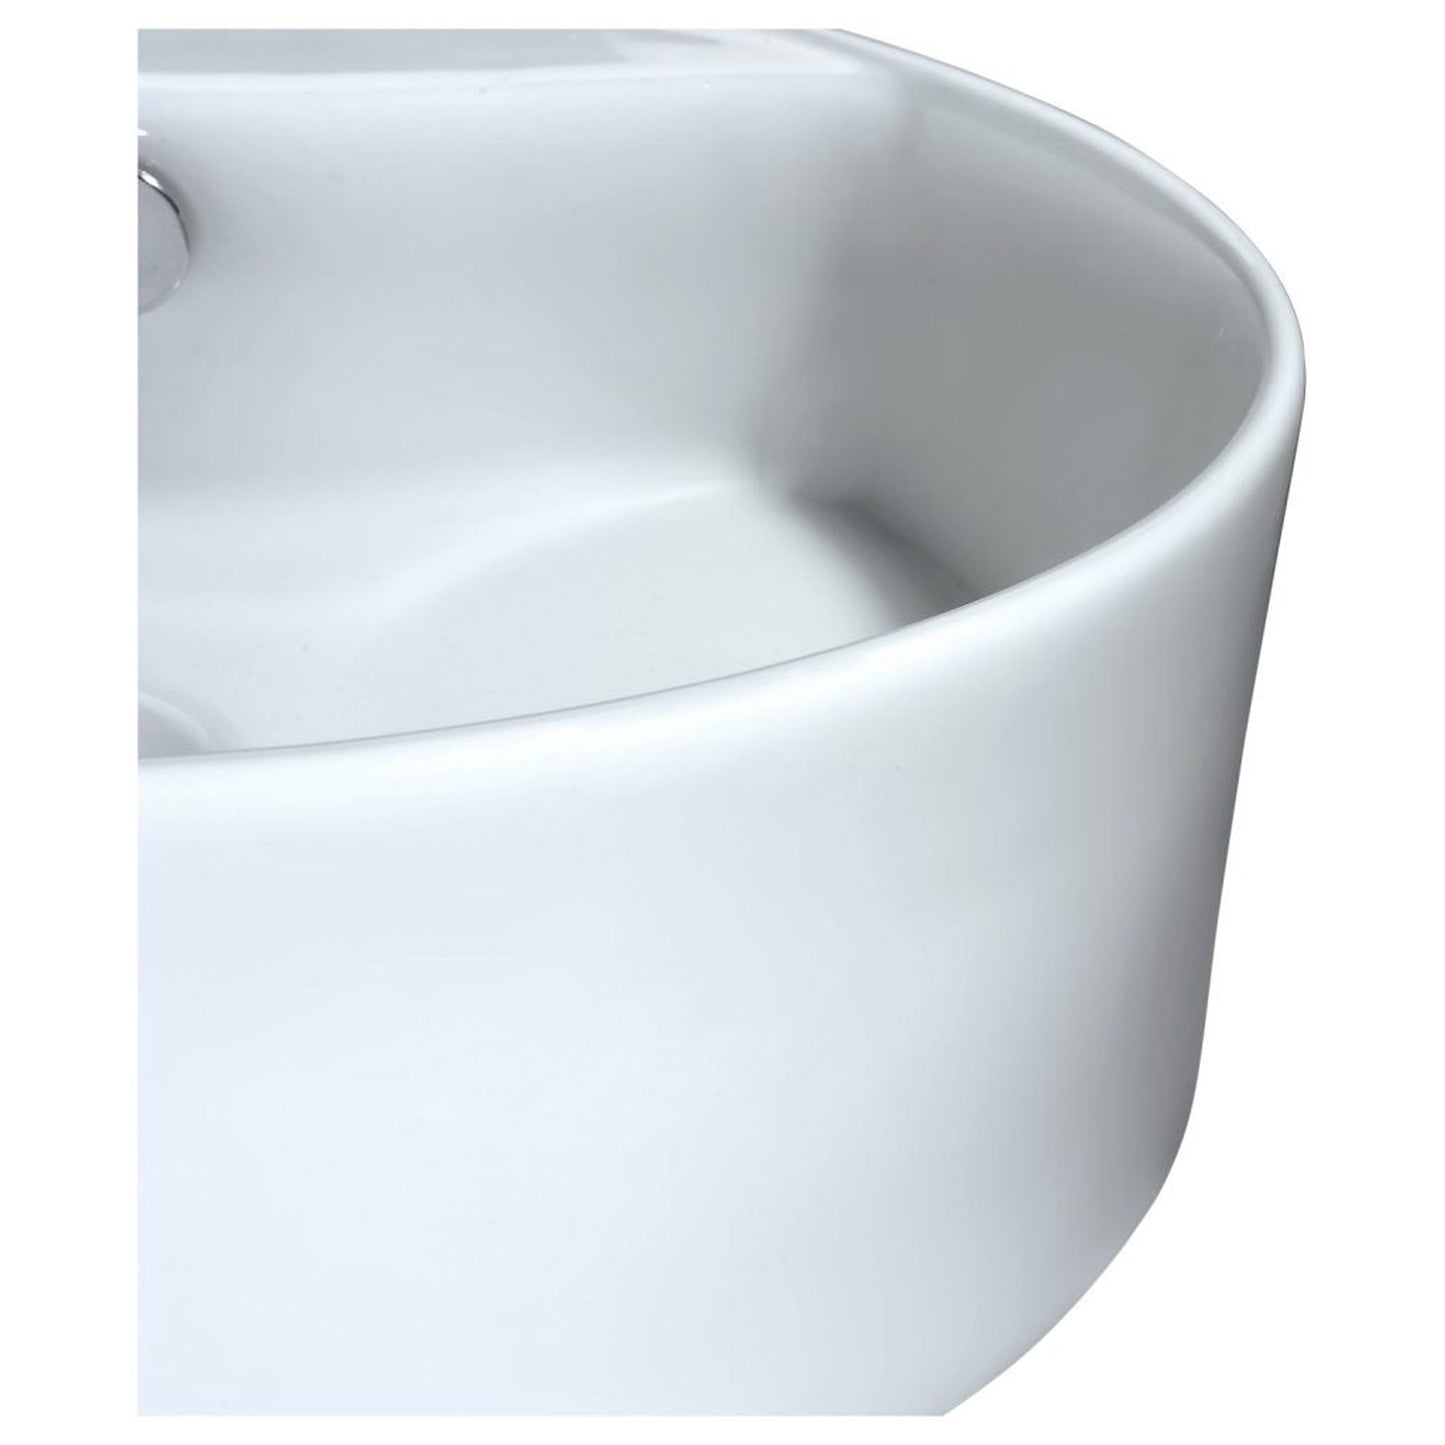 ANZZI Vitruvius Series 19" x 19" Single Hole Round Glossy White Vessel Sink With Built-In Overflow